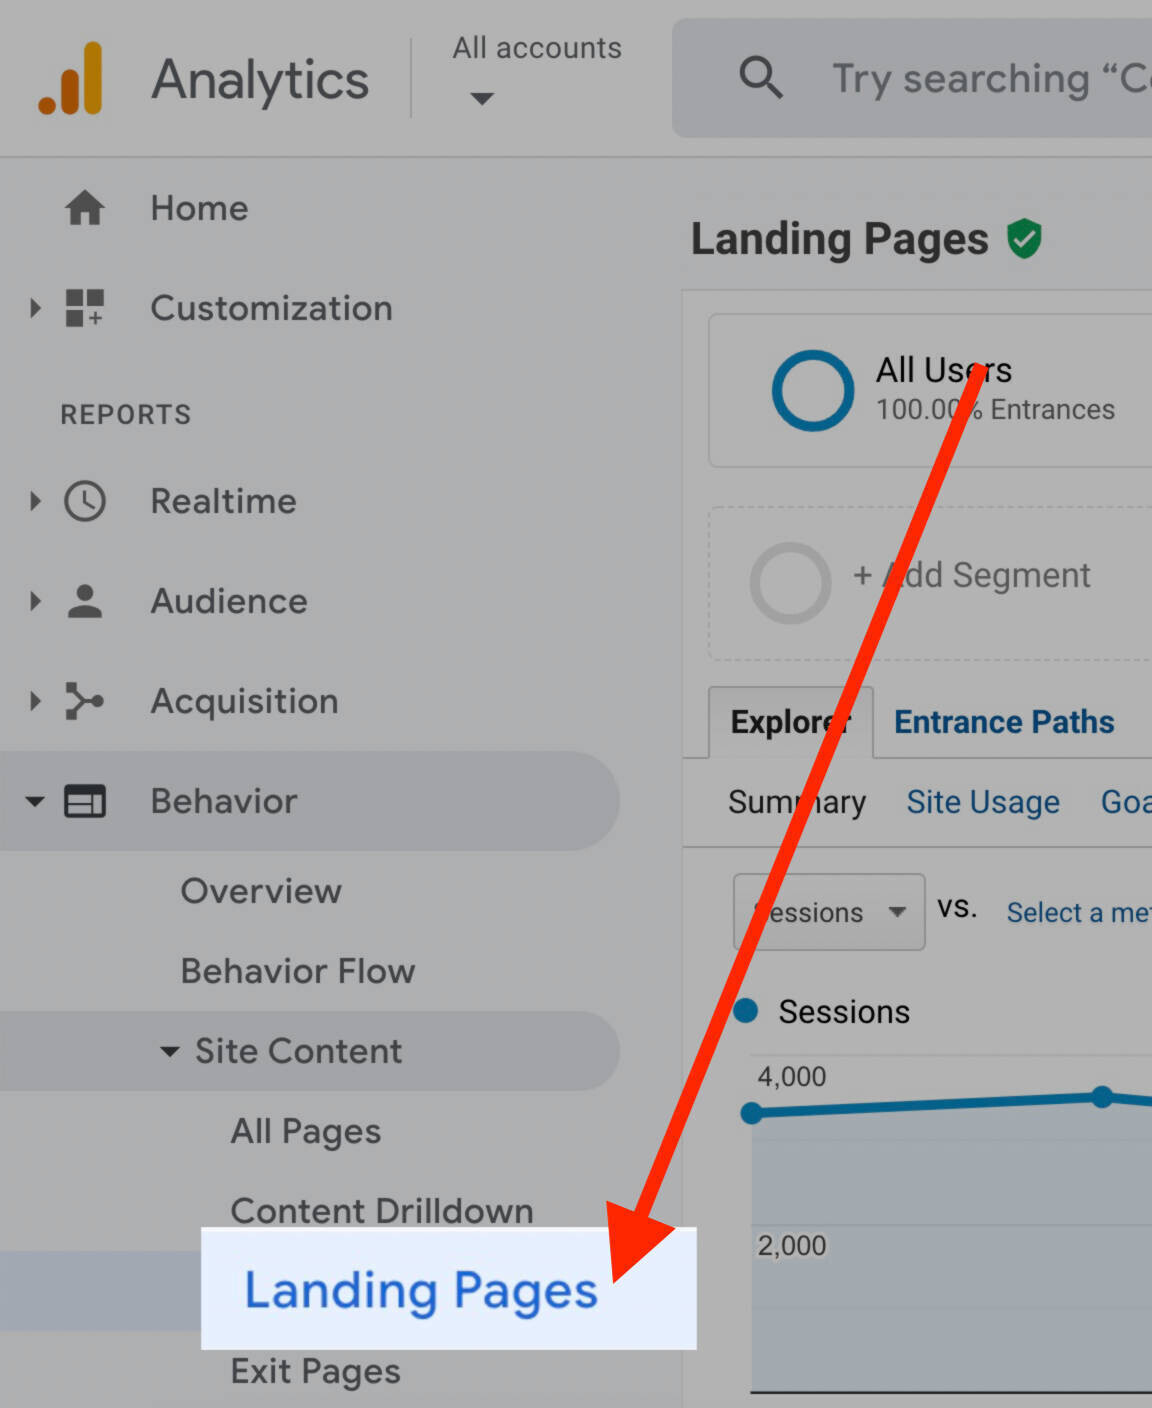 "Landing pages" button in nav bar highlighted